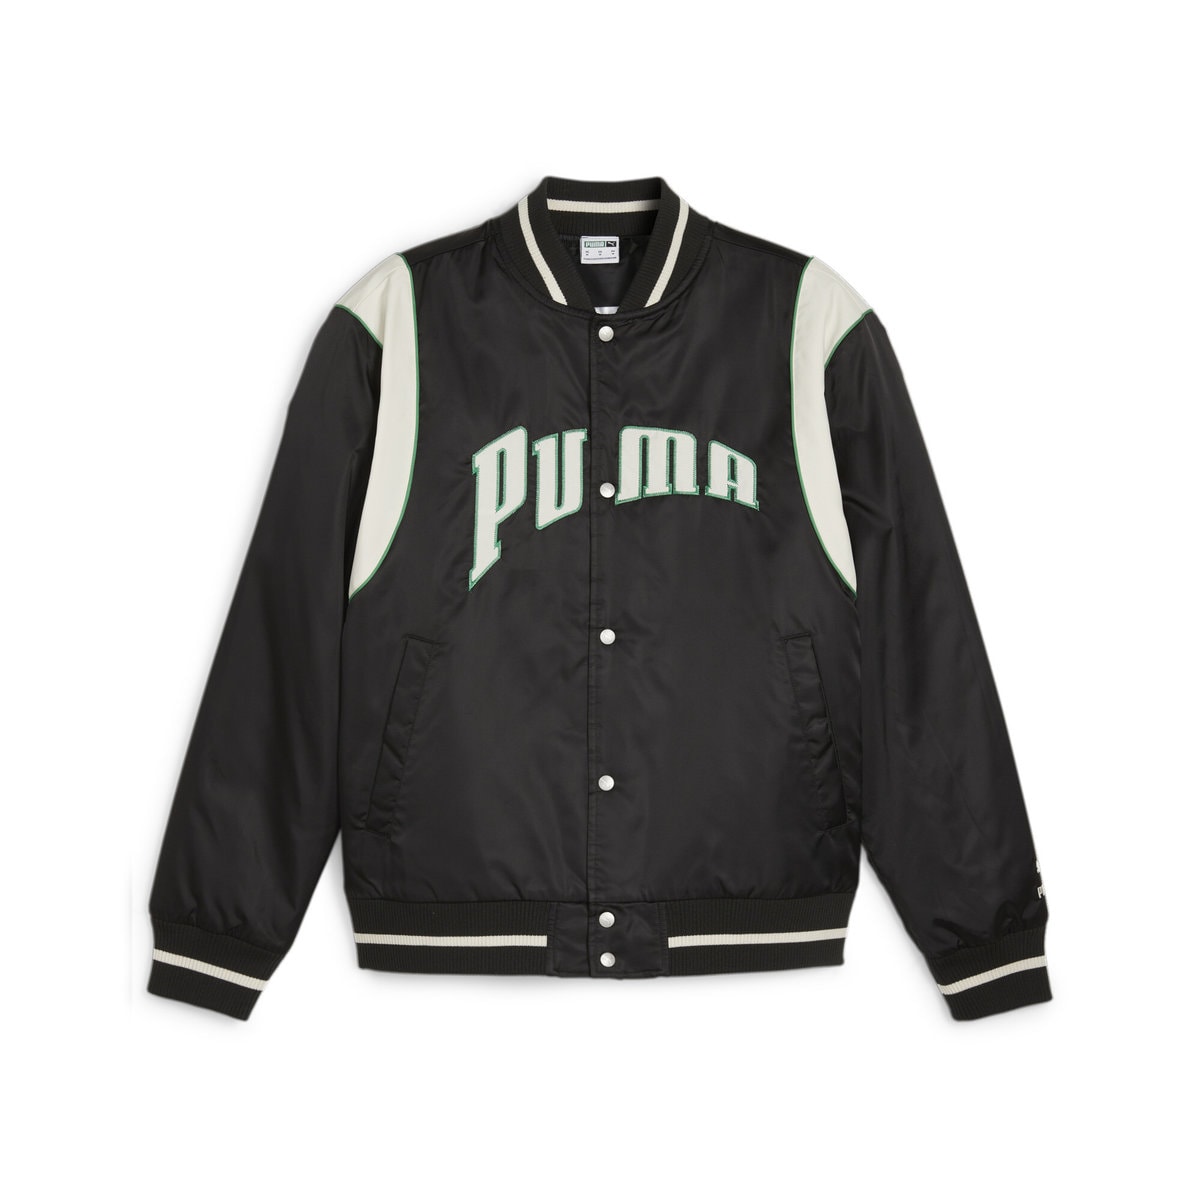 FOR THE FANBASE VERSITY JACKET ¥19,800